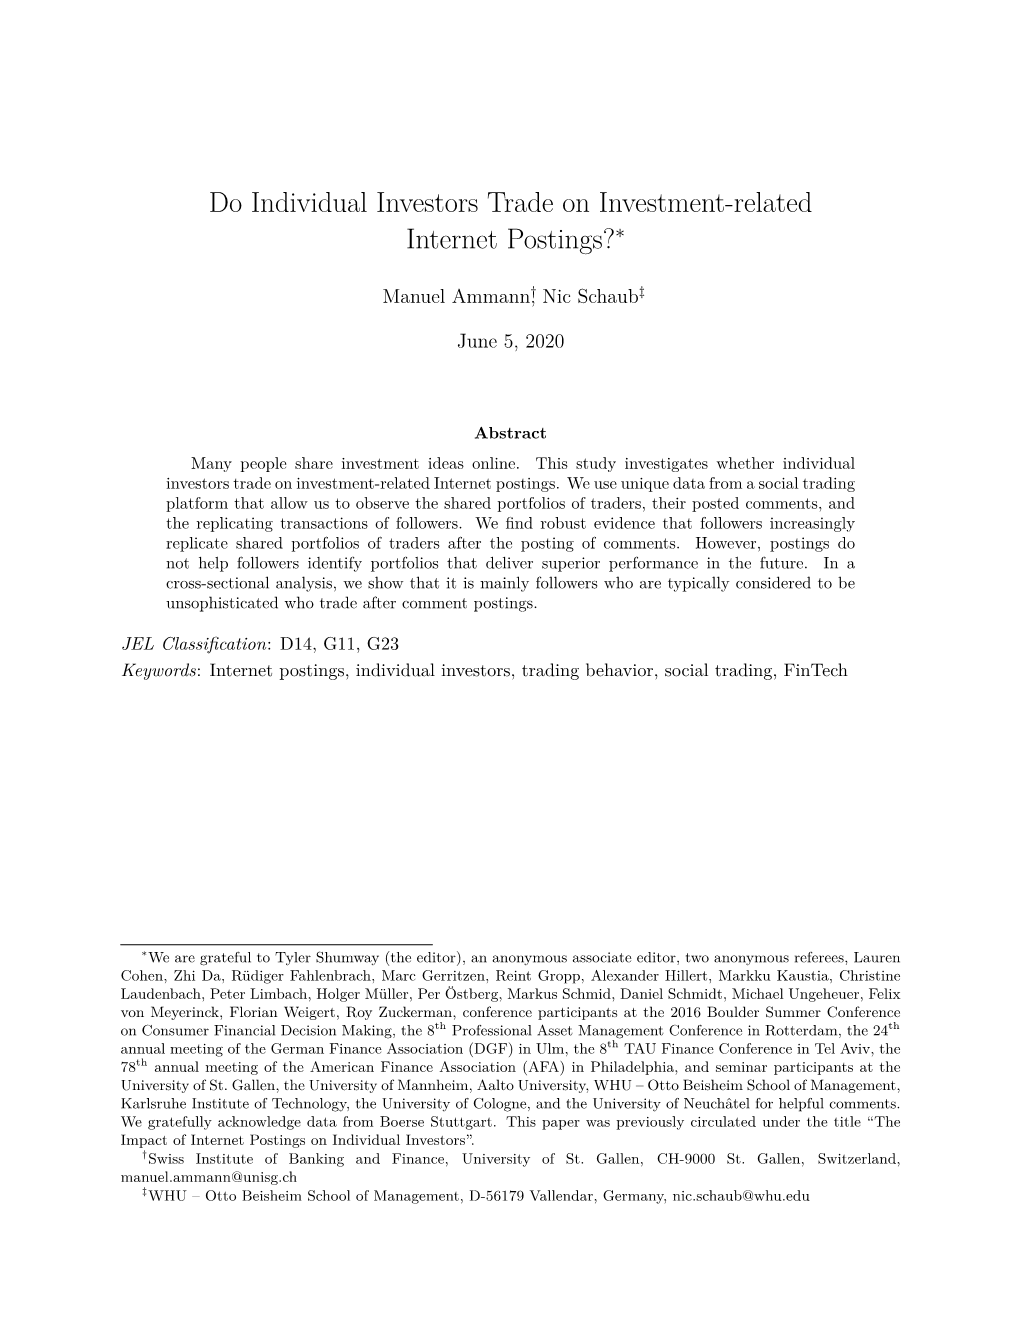 Do Individual Investors Trade on Investment-Related Internet Postings?∗